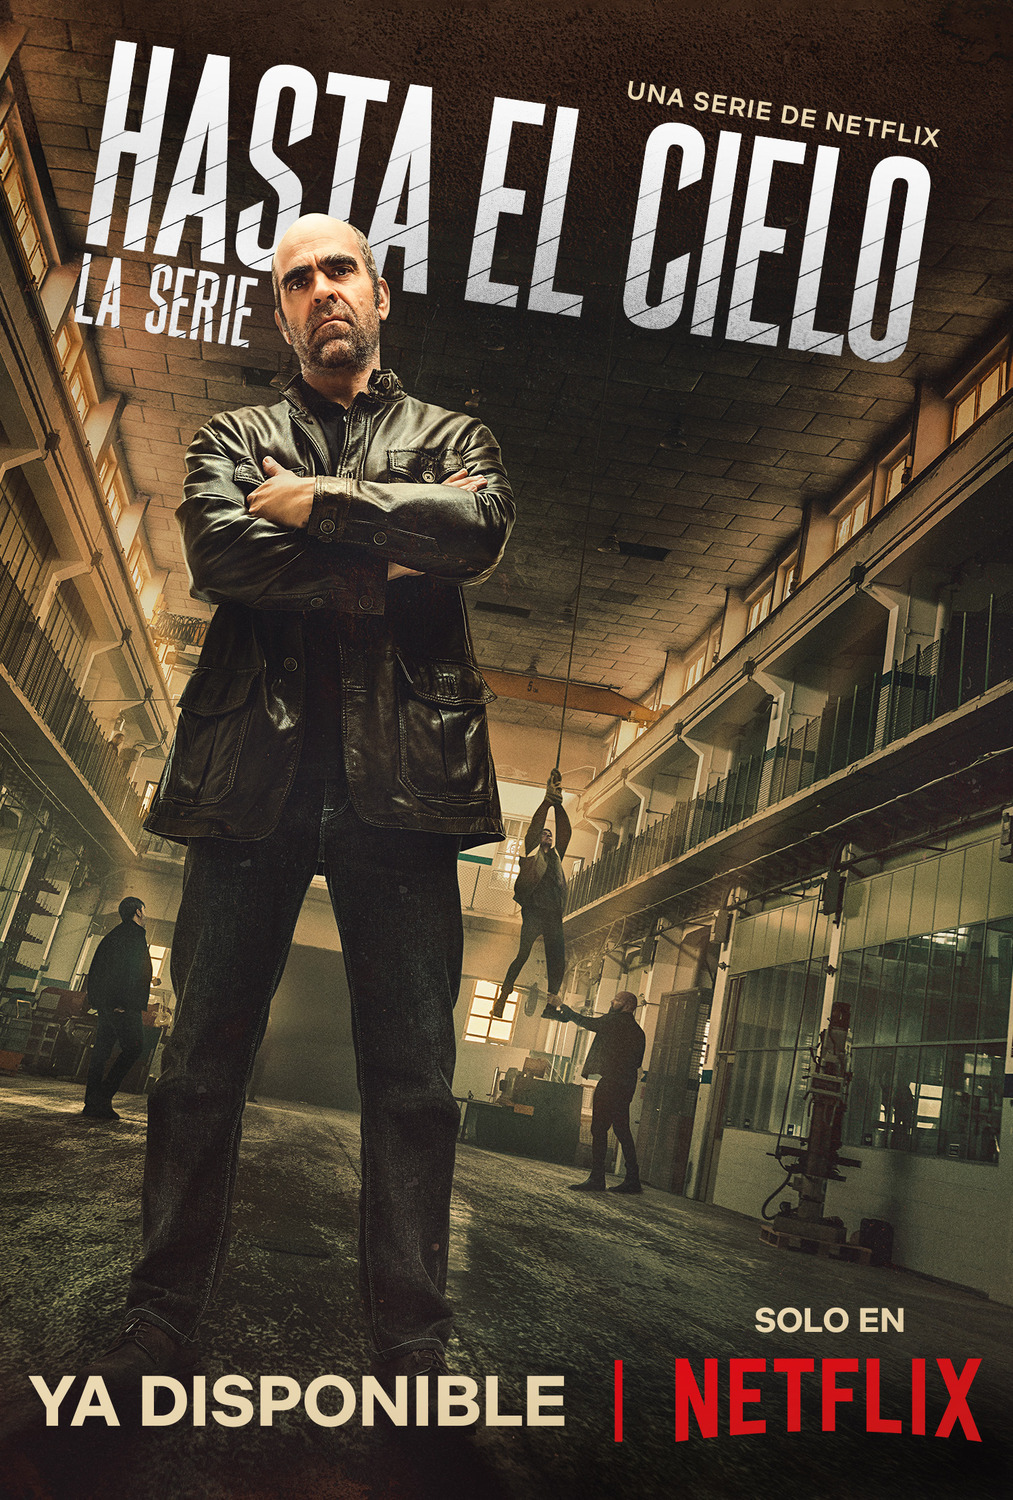 Extra Large TV Poster Image for Hasta el cielo: La serie (#4 of 7)